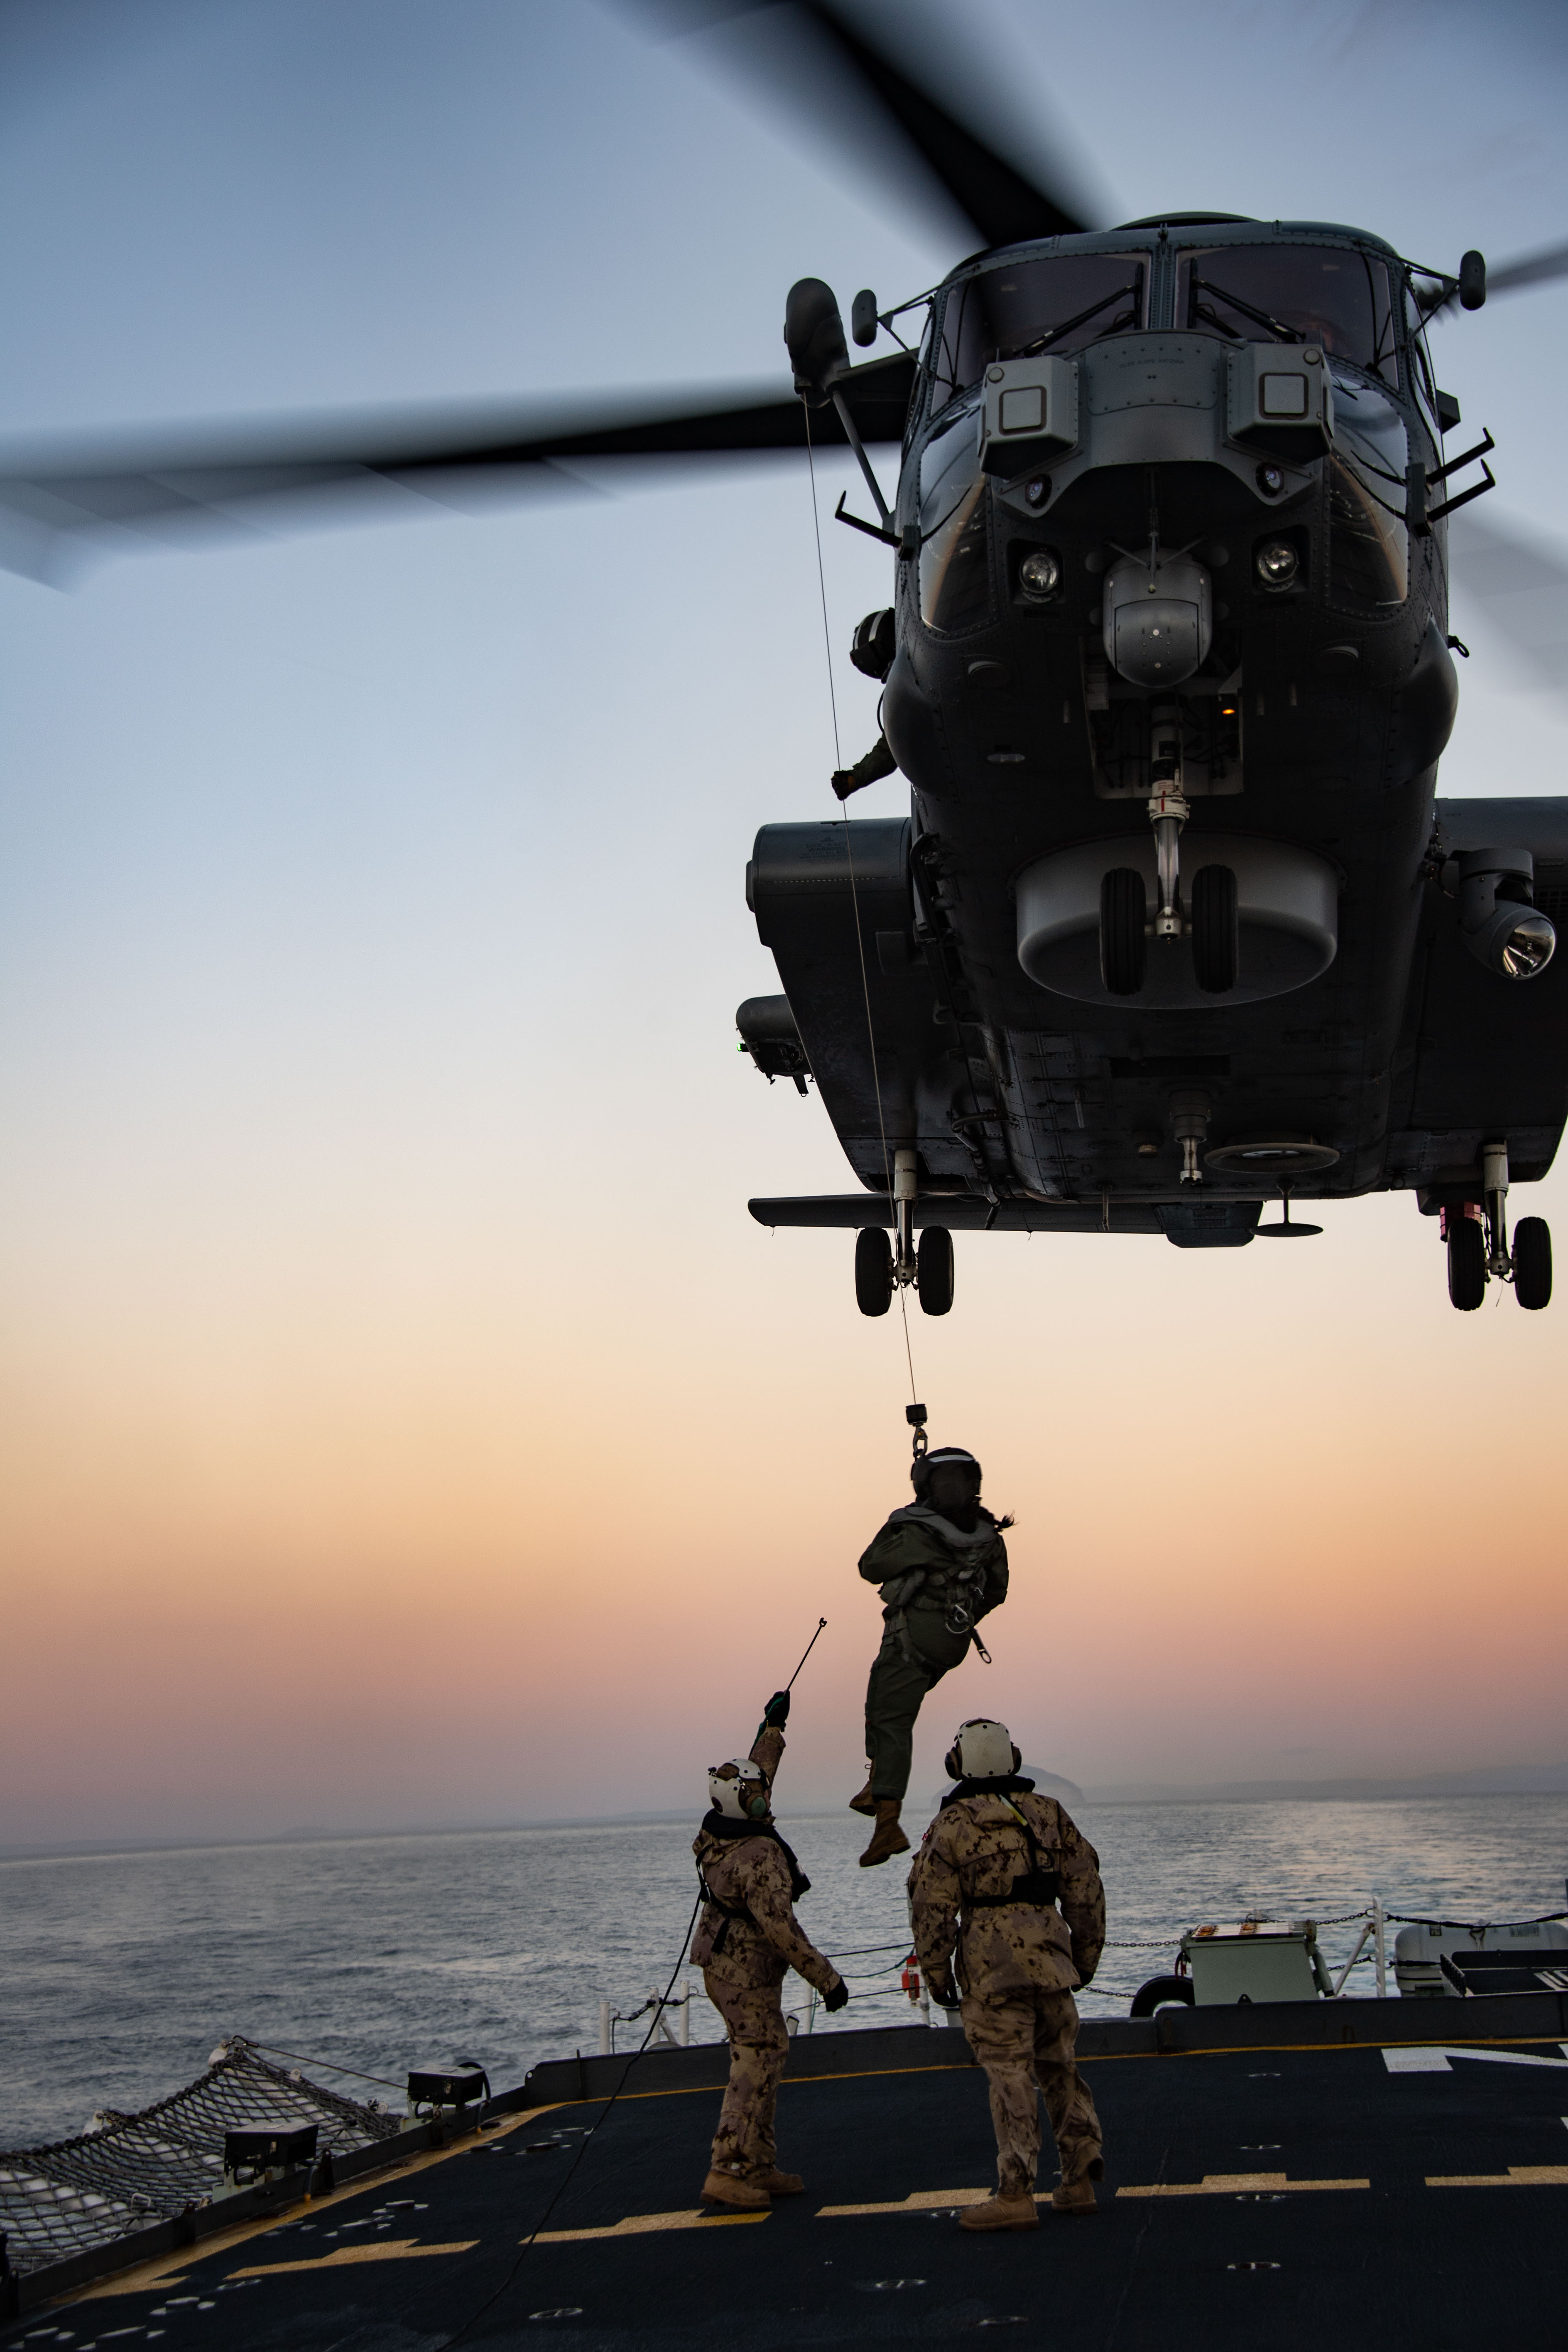 Corporal (Cpl) Mathieu Roy and Cpl Theodore Ardelian assist Captain Catherine Drover disembark from a CH-148 Cyclone helicopter during a hoisting exercise aboard HMCS Fredericton, which took place off the coast of Scotland during Operation Reassurance, September 19, 2021.